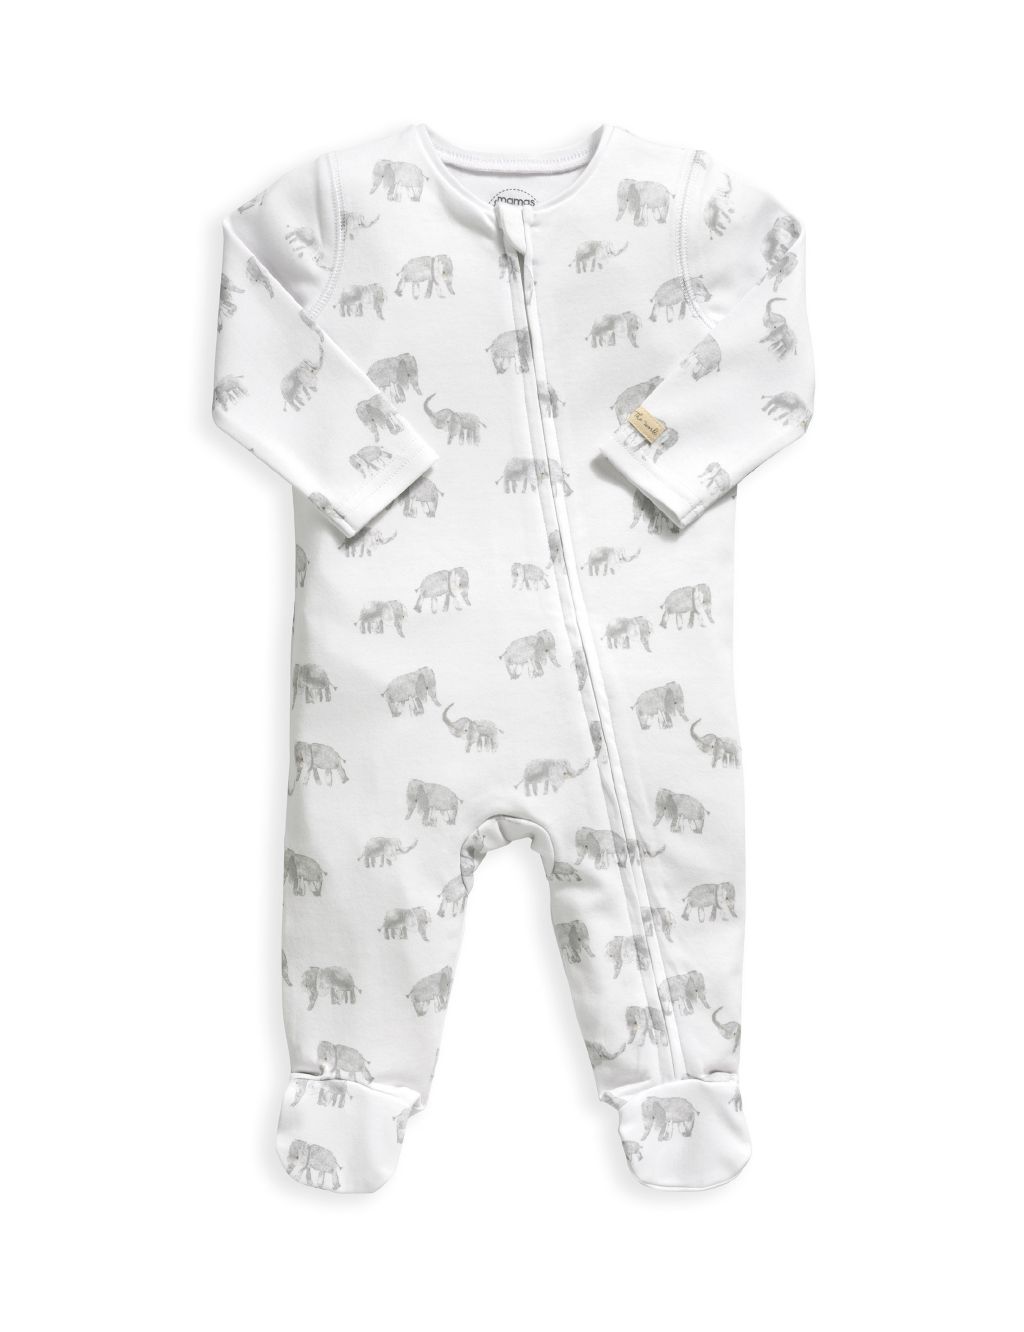 Elephant Print All In One (6½lbs-12 Mths)